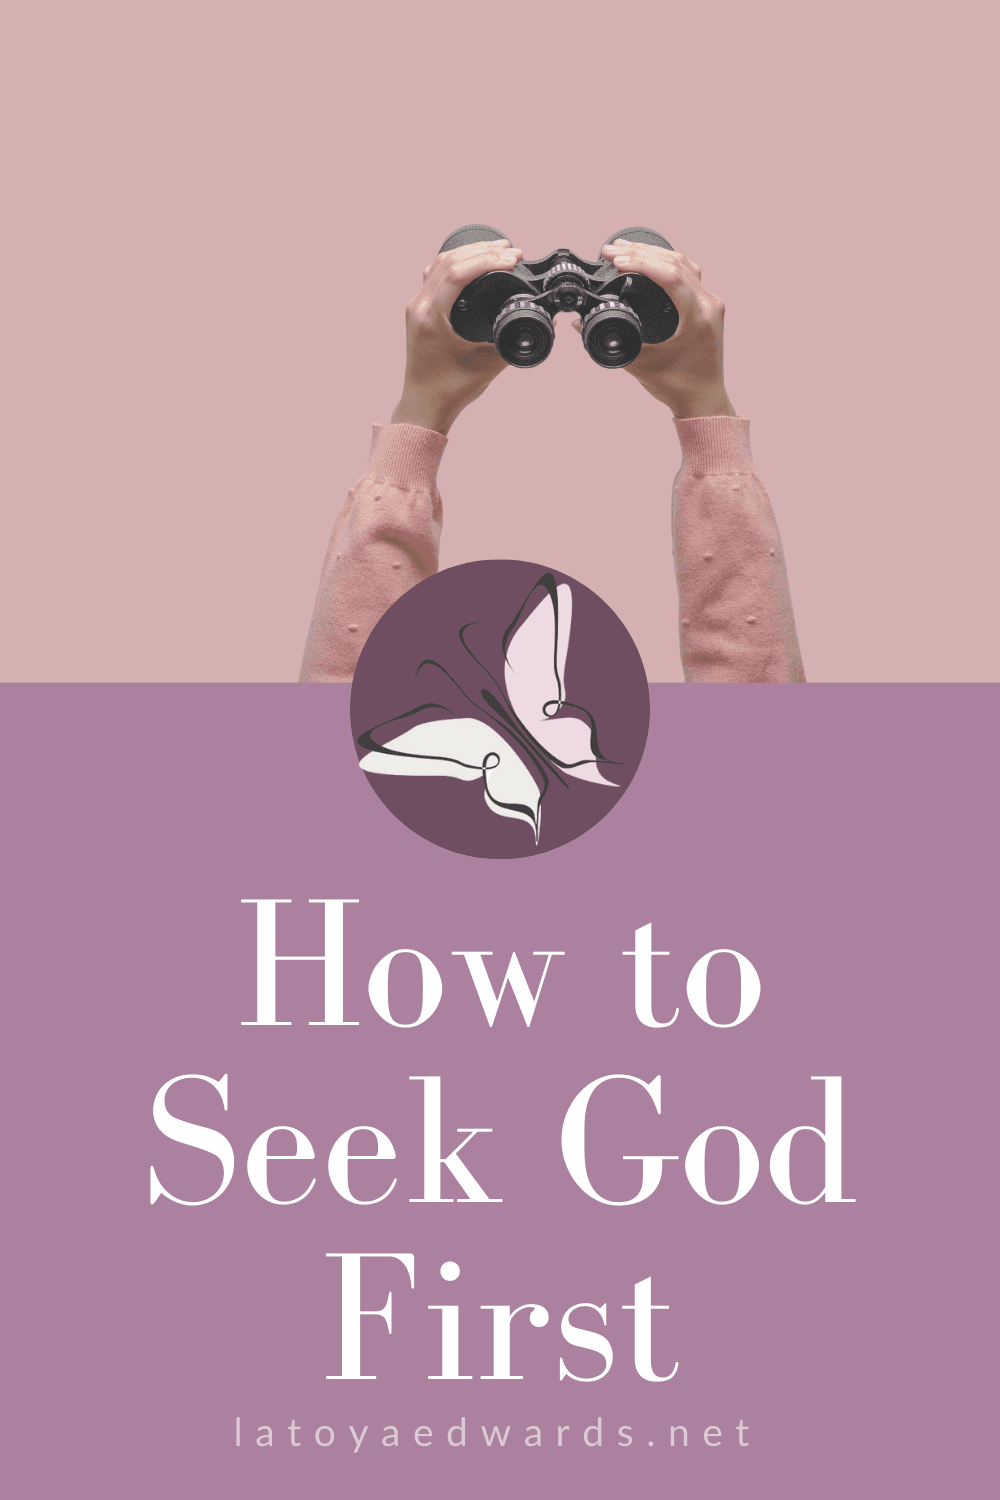 Learning how to seek God first is important for the Christian life. Being able to put God first will help you during hard times when you need guidance and direction. Here's a look into how you should live your life as a follower of Jesus.